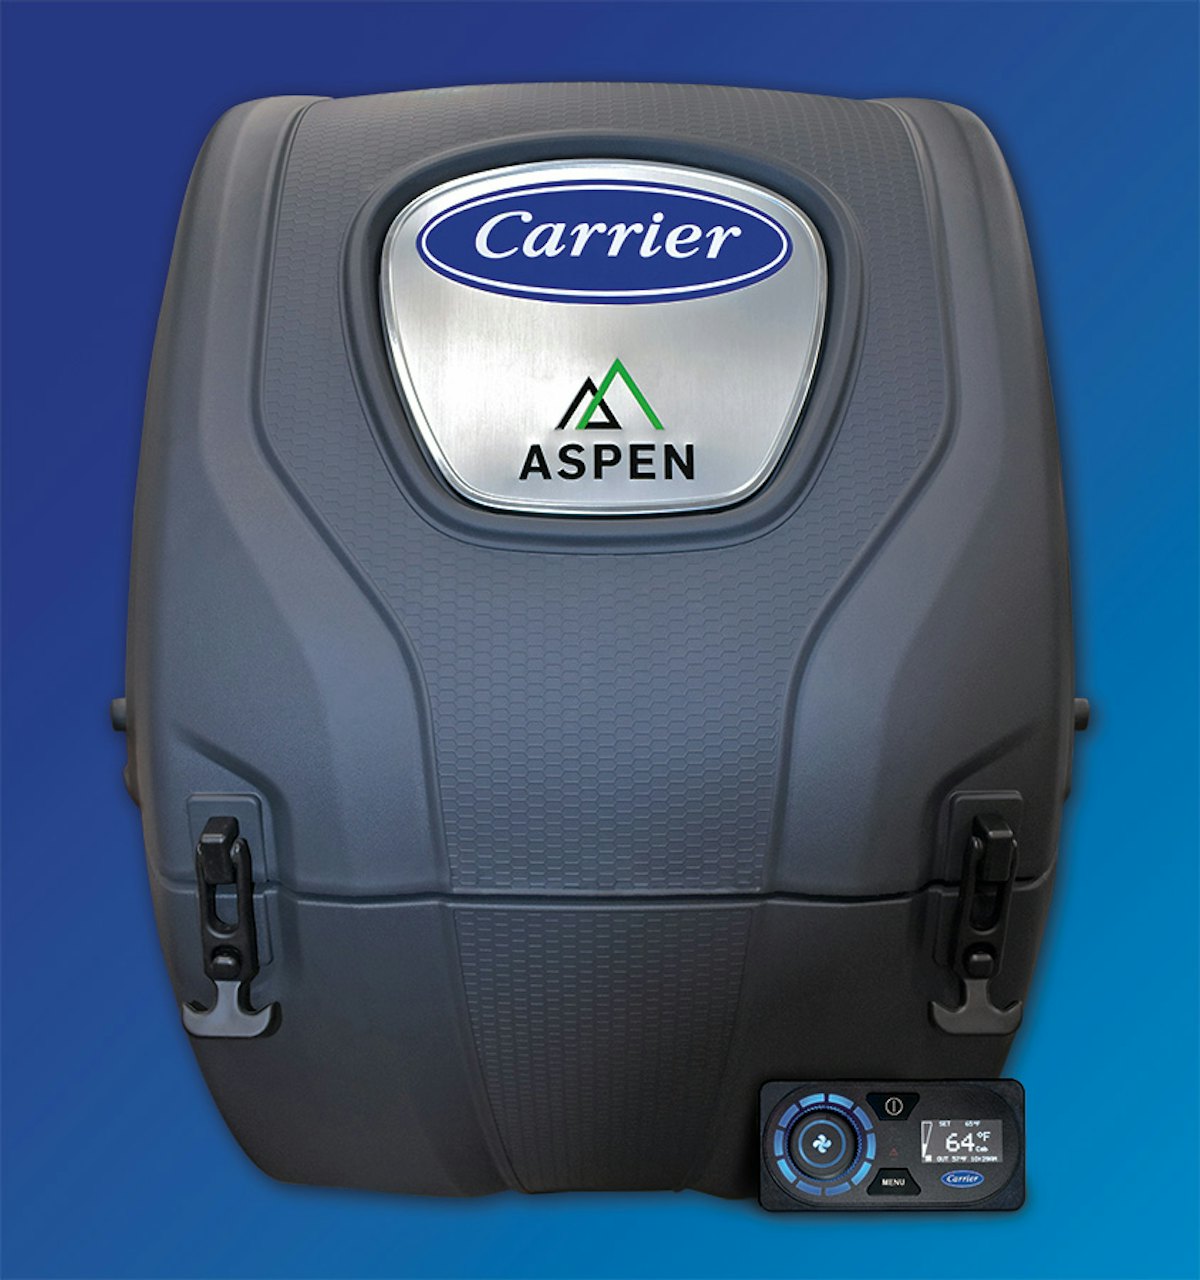 New APU from Carrier Transicold | Commercial Carrier Journal